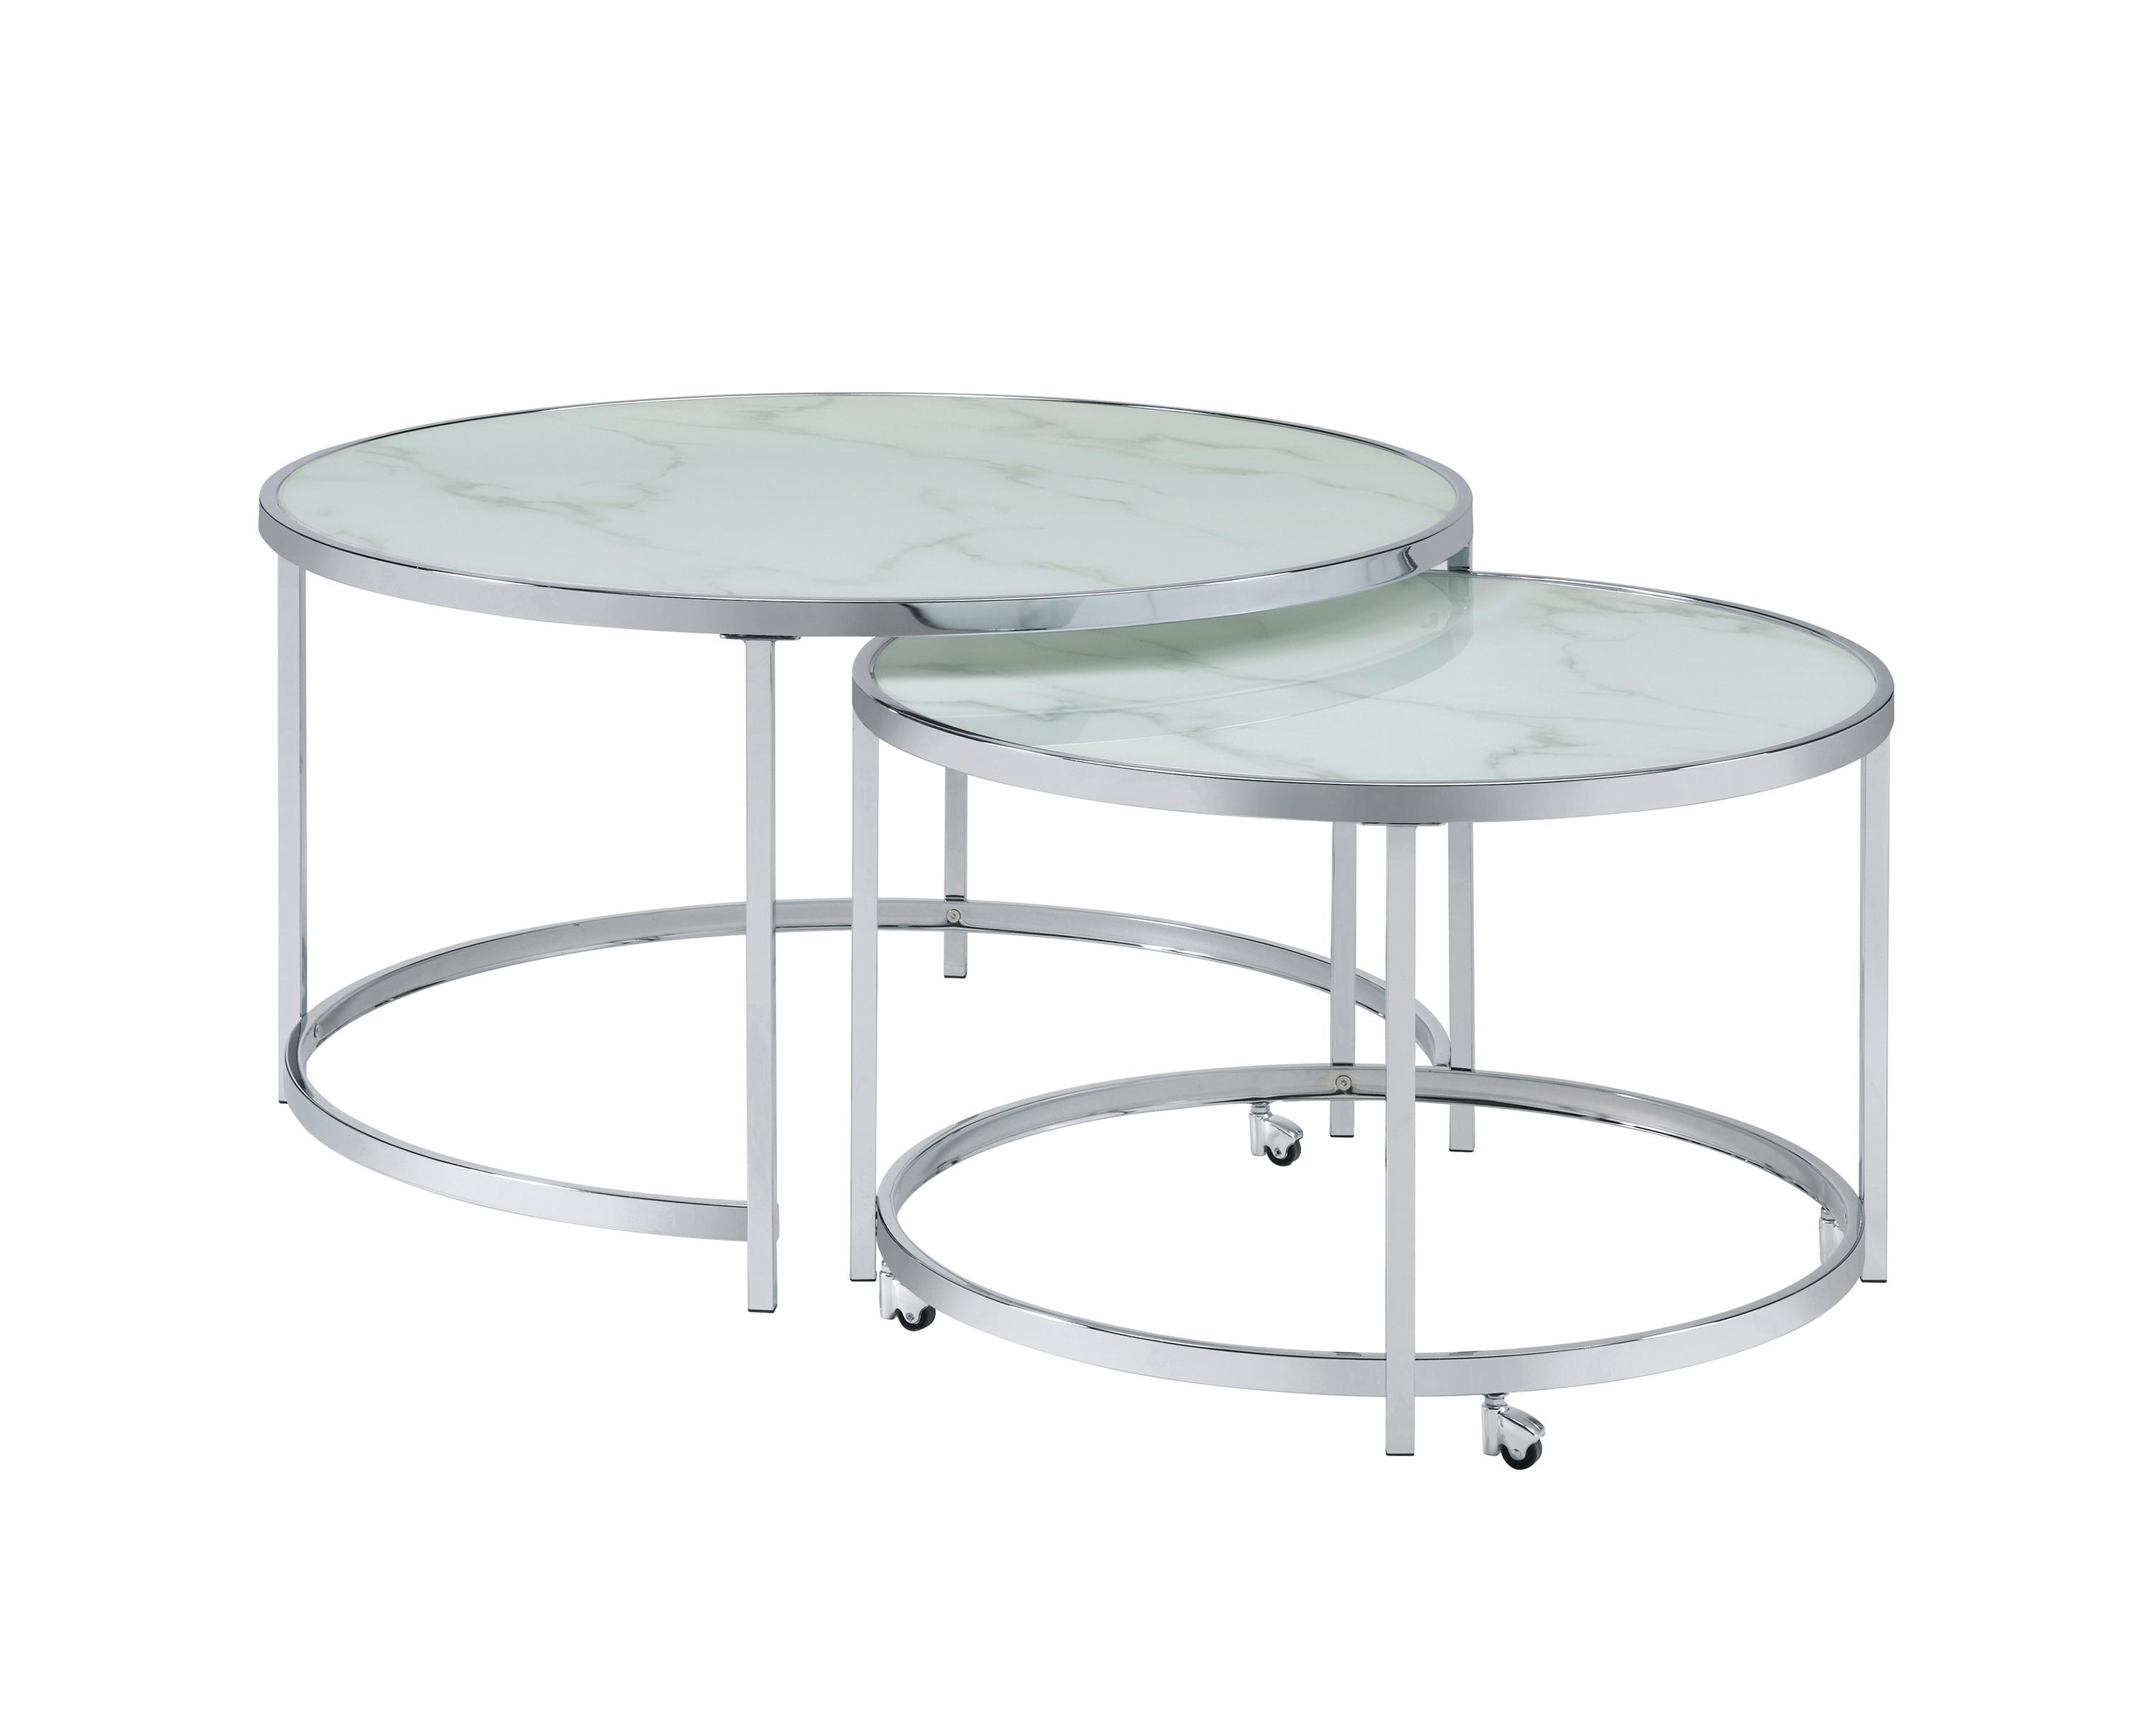 Contemporary Nesting Tables Set 721528 721528 in Chrome 